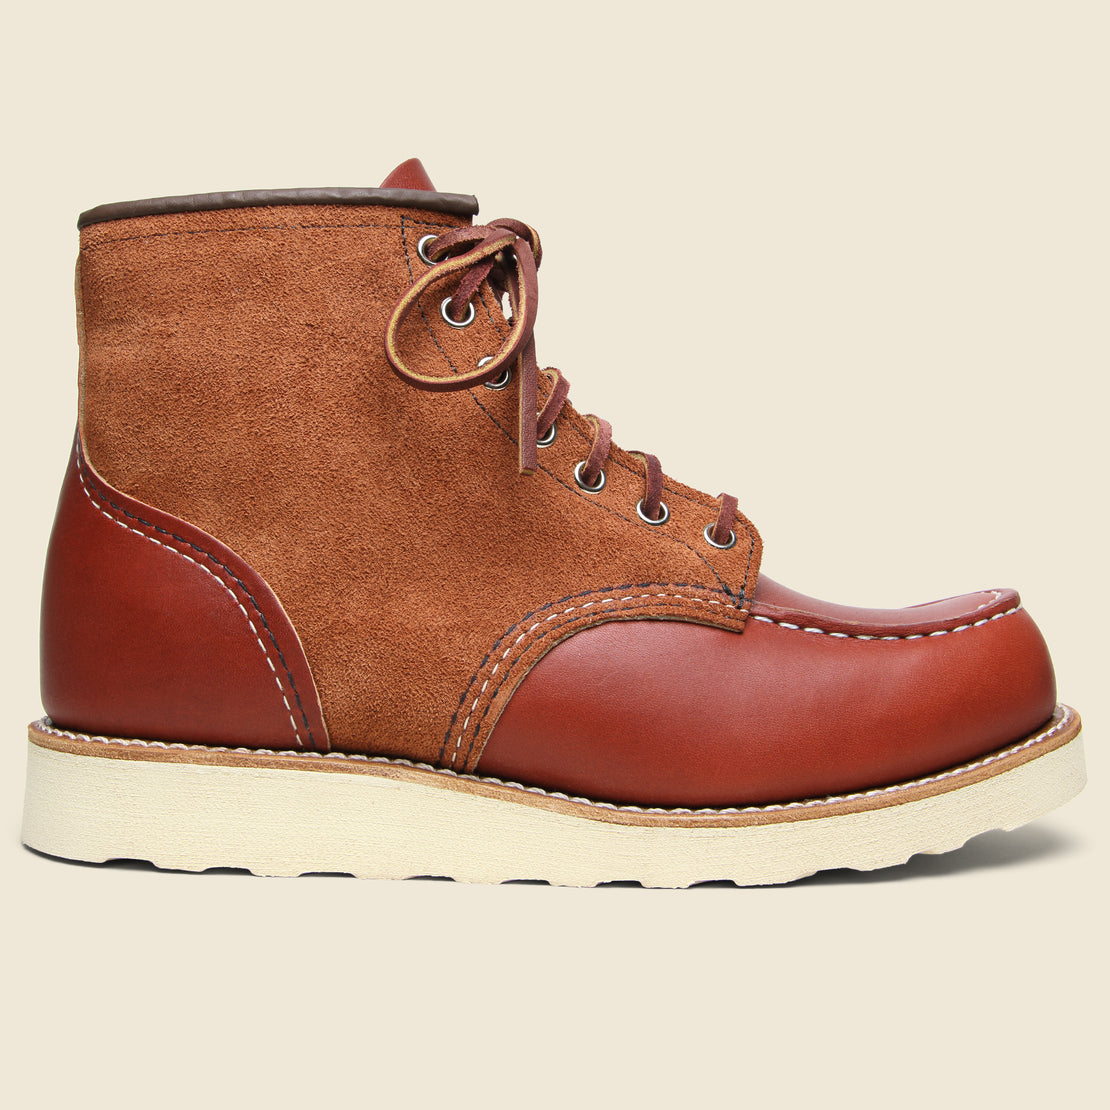 Red Wing 6" Moc Toe No. 8819 - Oro Russet Portage